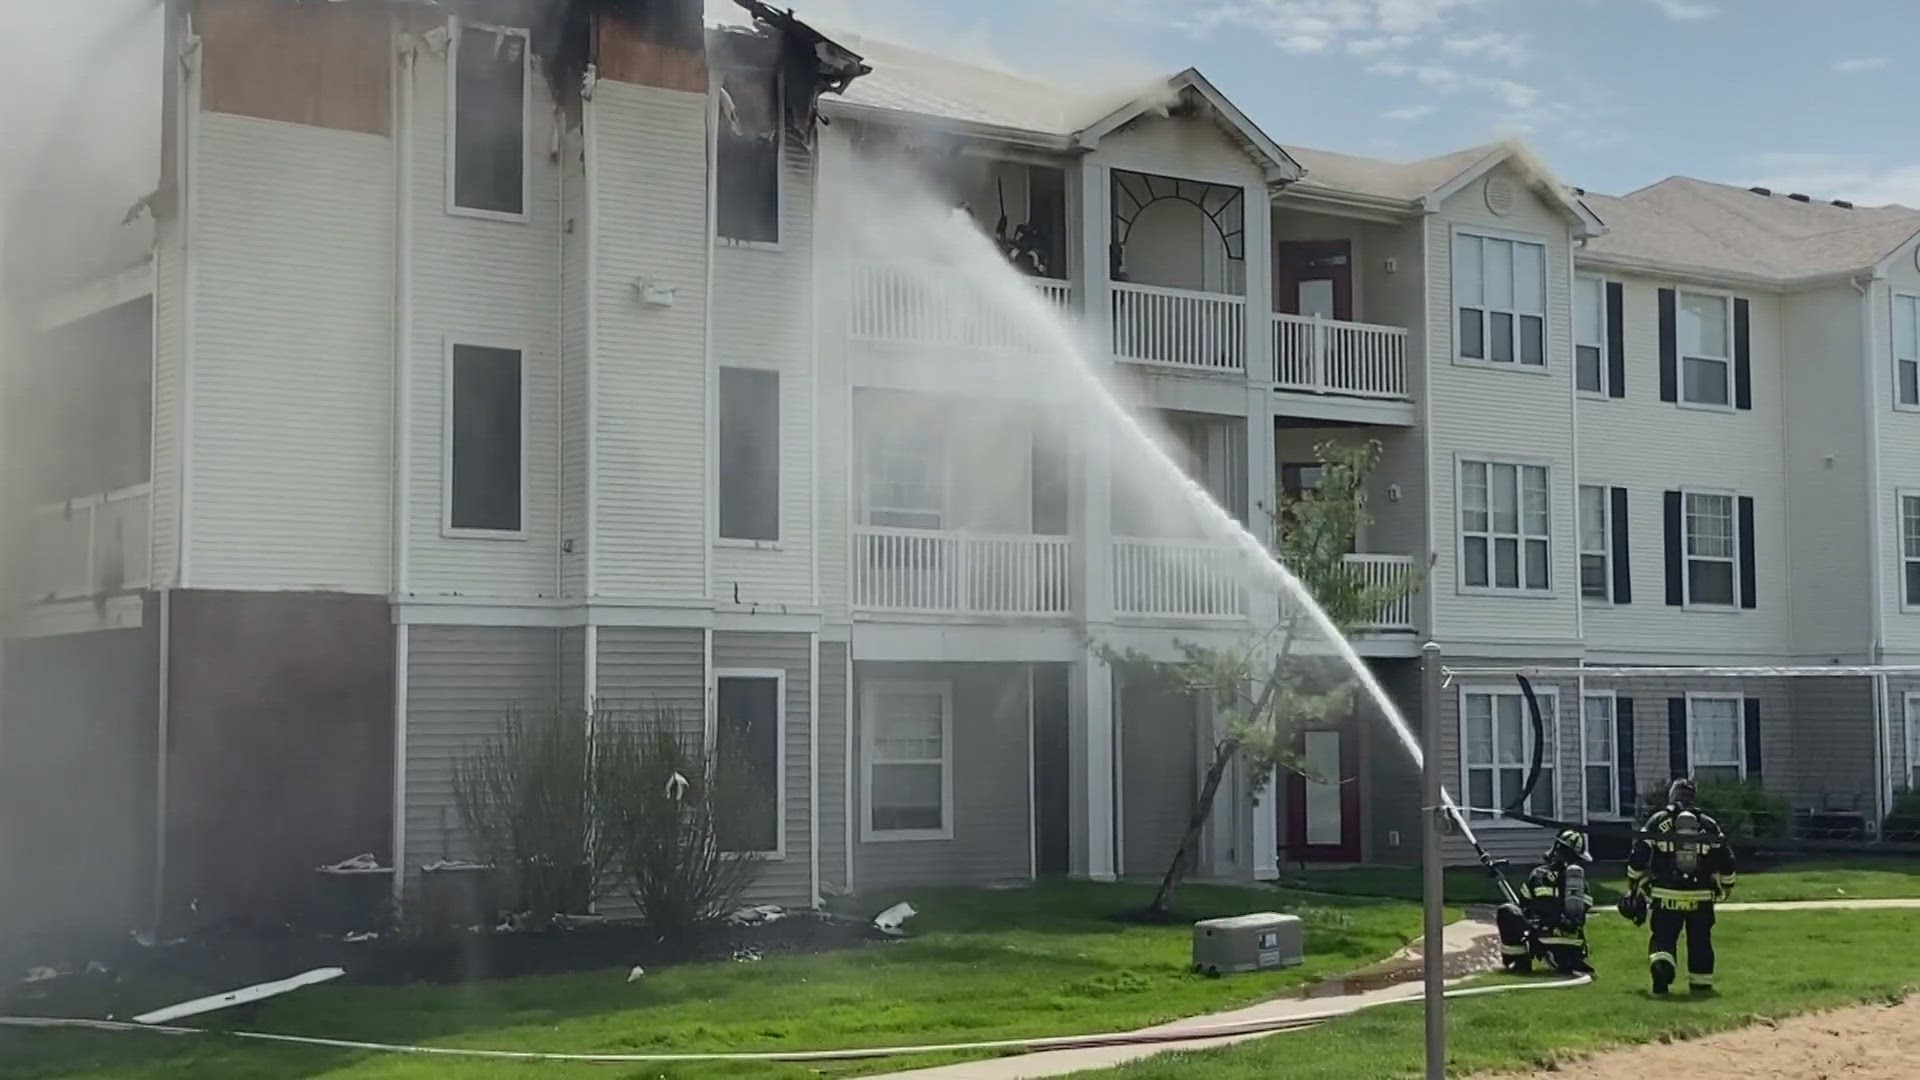 Firefighters are responding to a large fire at an apartment complex in O'Fallon, Missouri. The fire broke out sometime before 11 a.m. Tuesday.